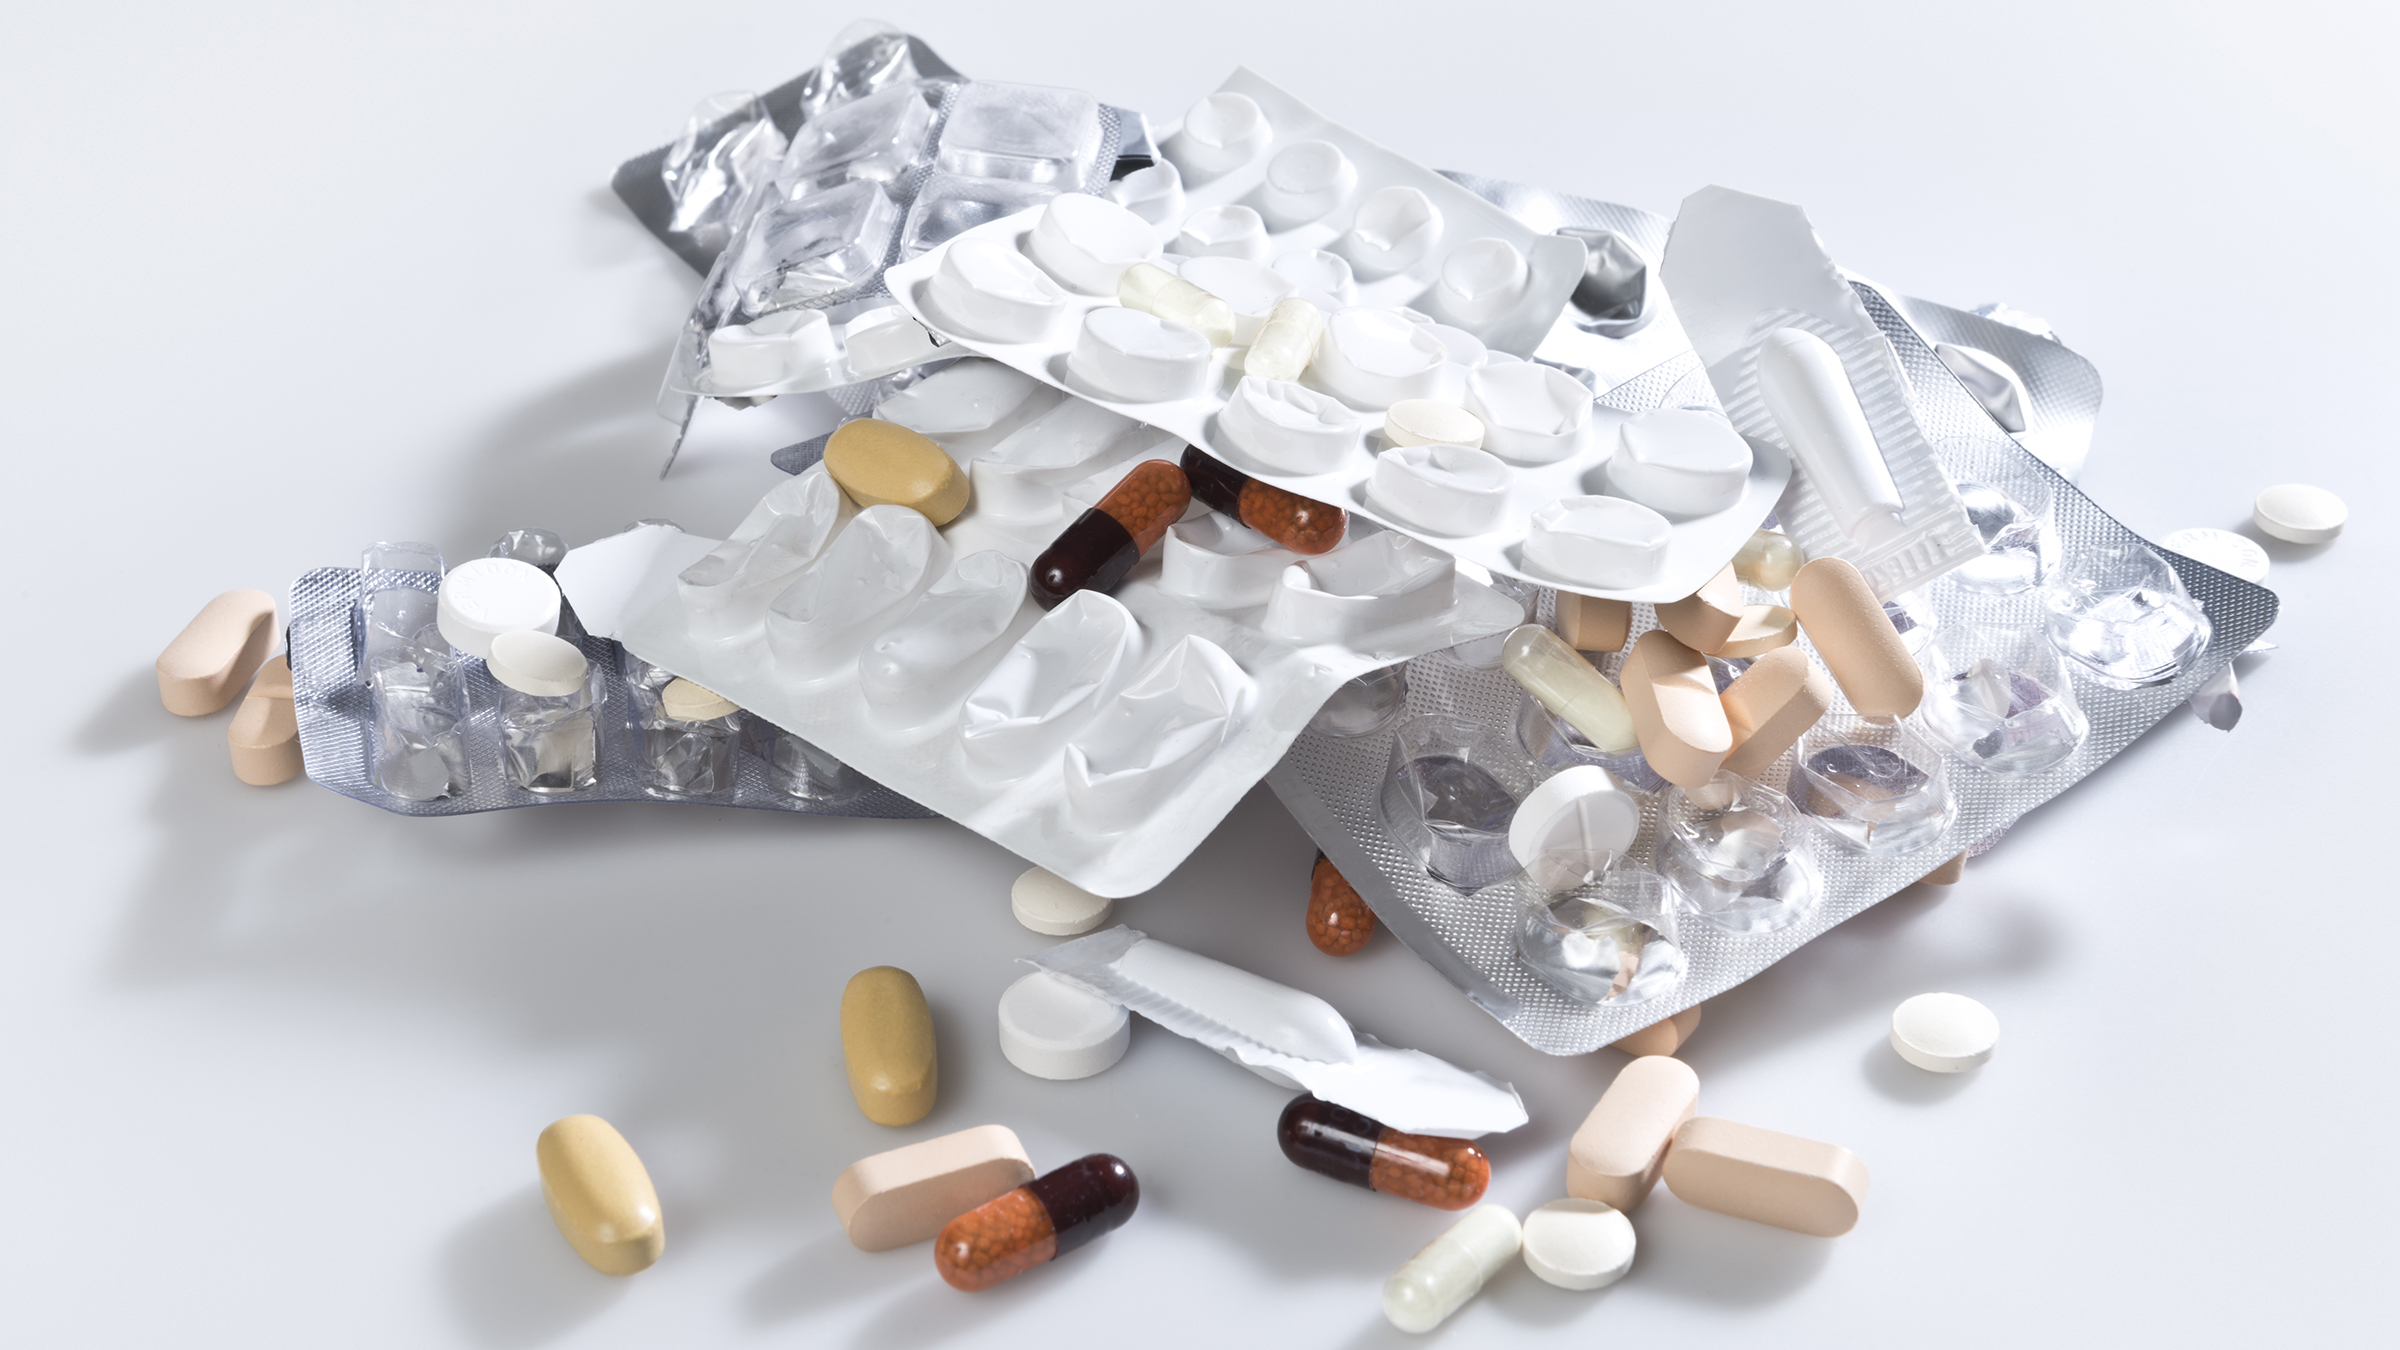 What Should You Do With Expired or Leftover Medications? - GoodRx